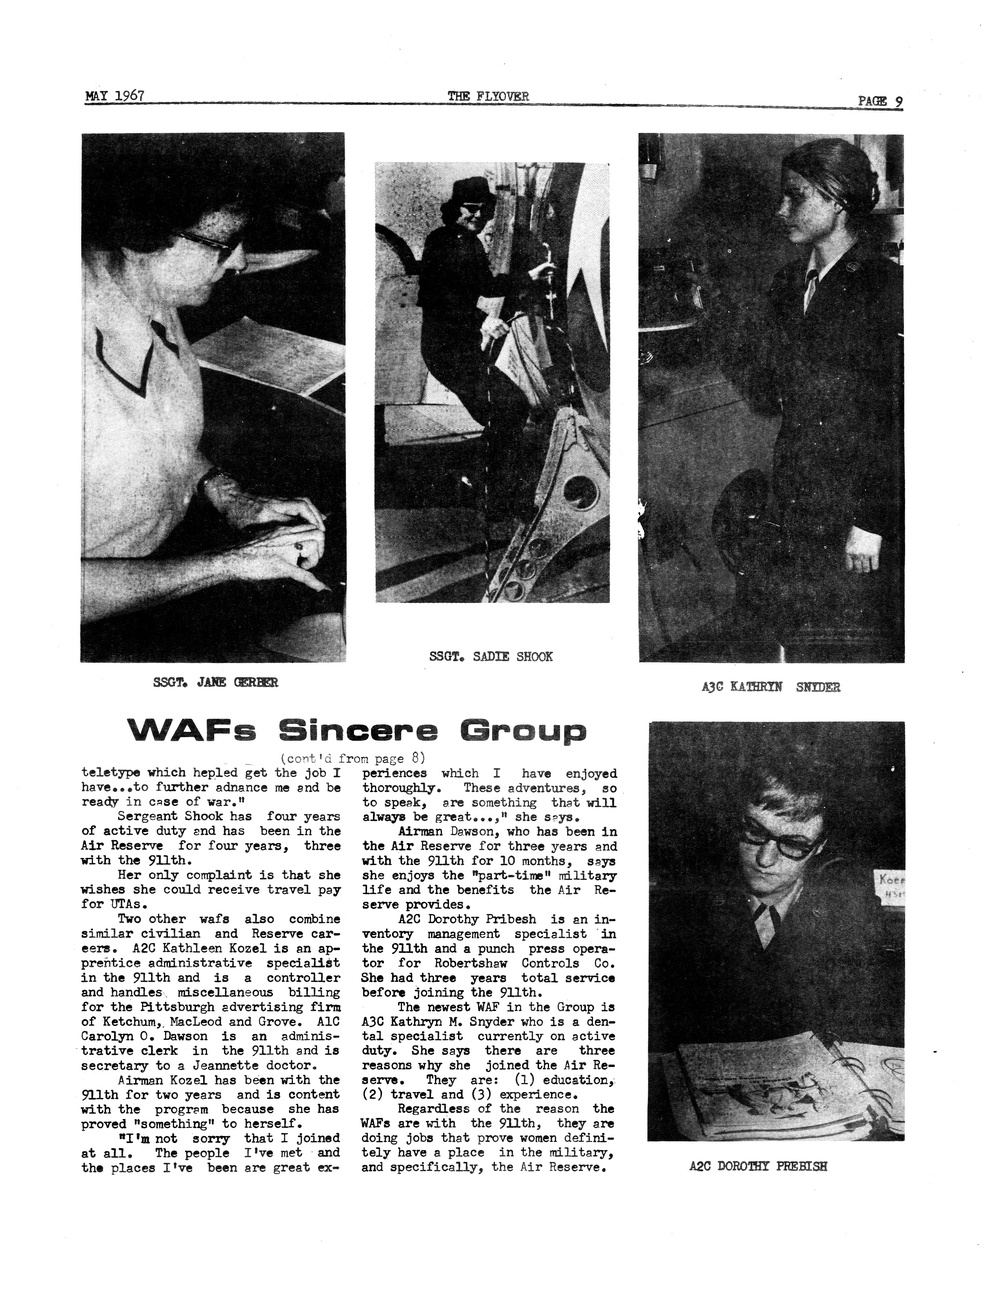 Newspaper Clipping - WAFs Sincere Group